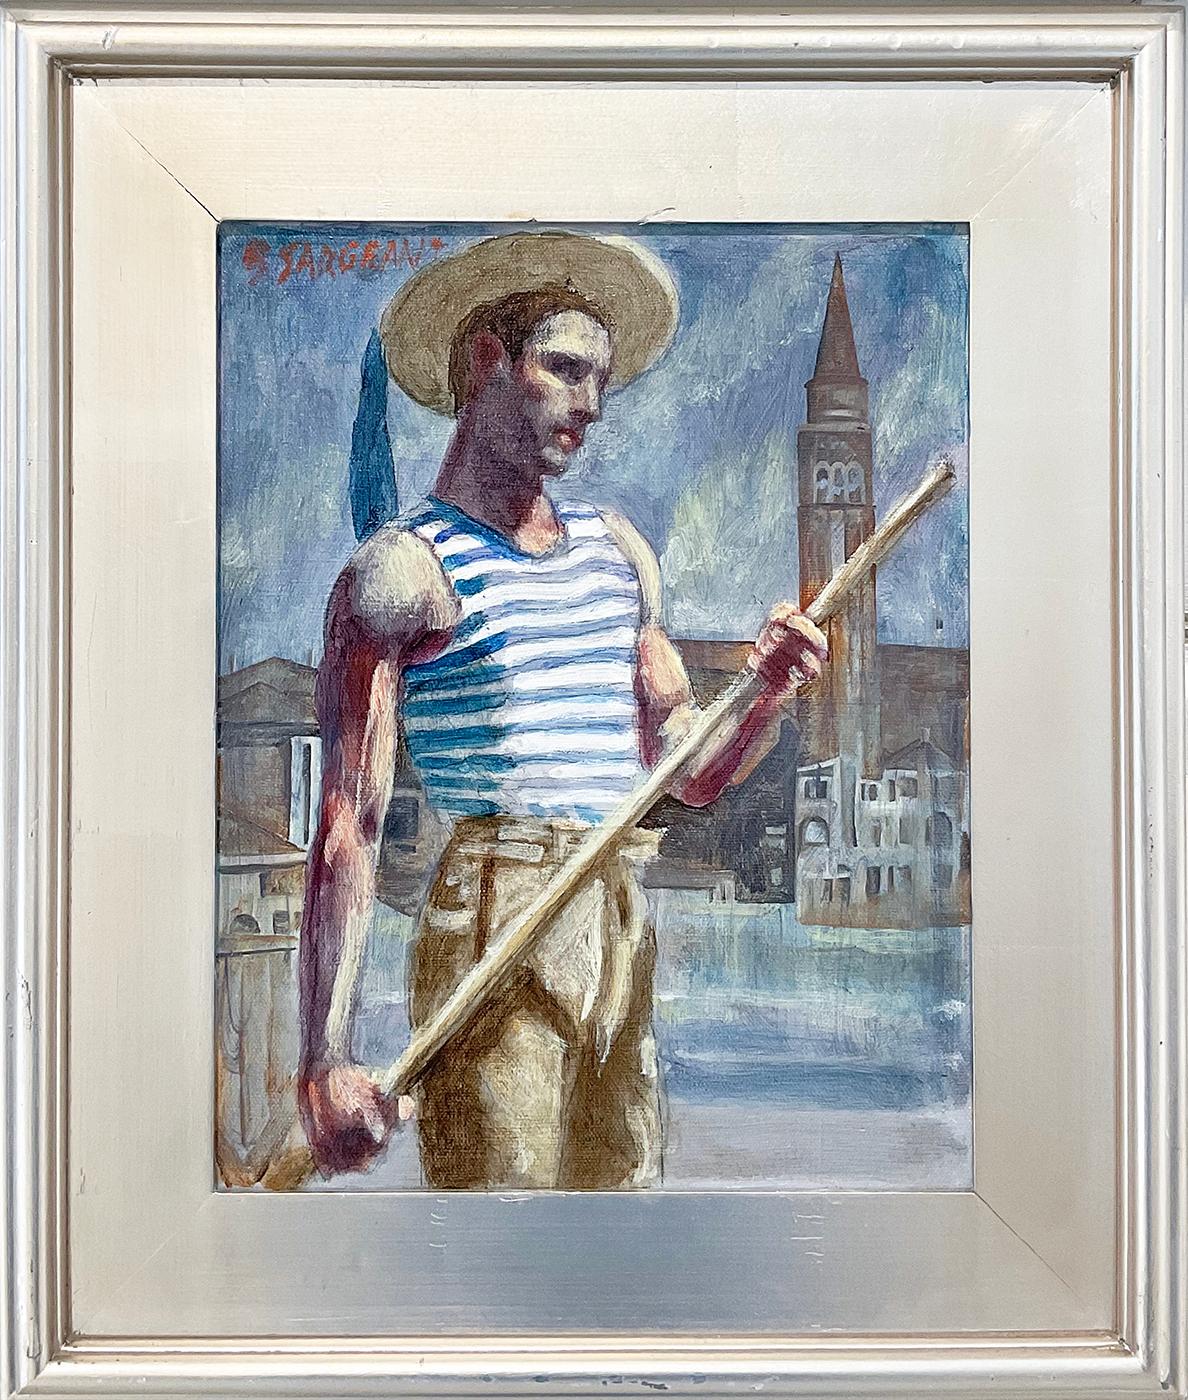 Gondolier (Figurative Painting of Man in Venice by Mark Beard, Bruce Sargeant)